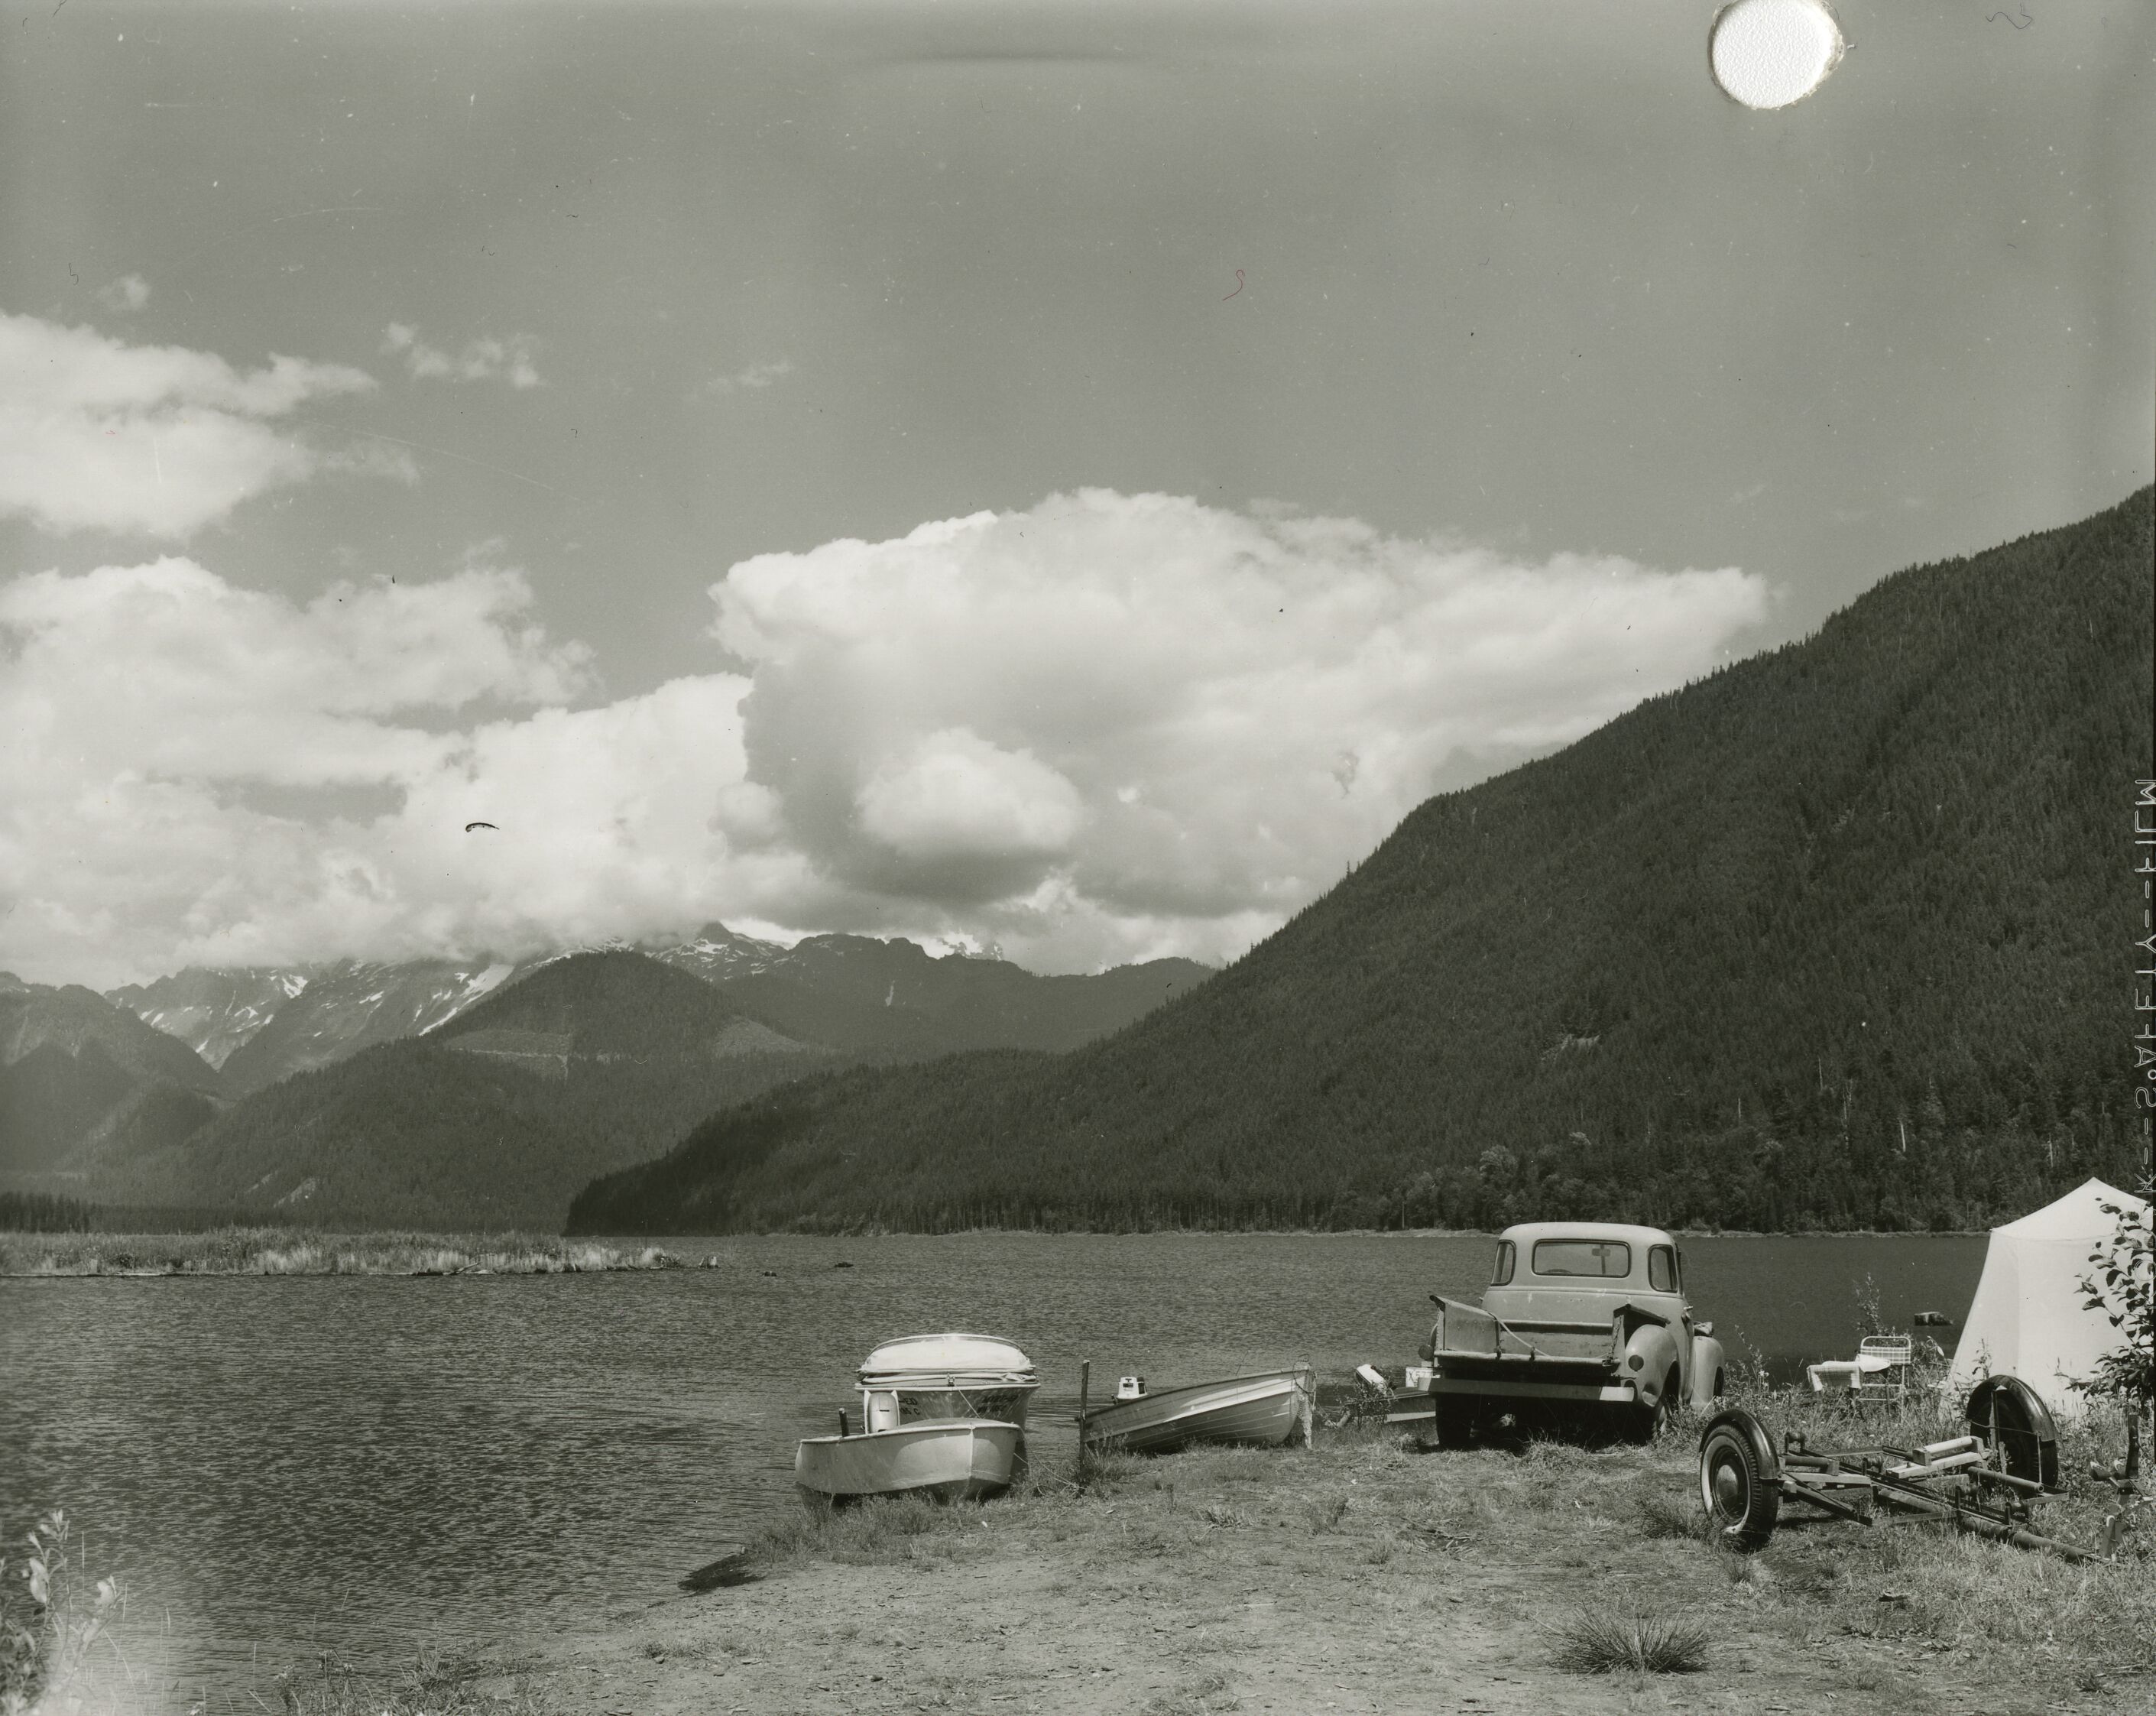 Two boats, a truck, and a tent on the shore of a lake.